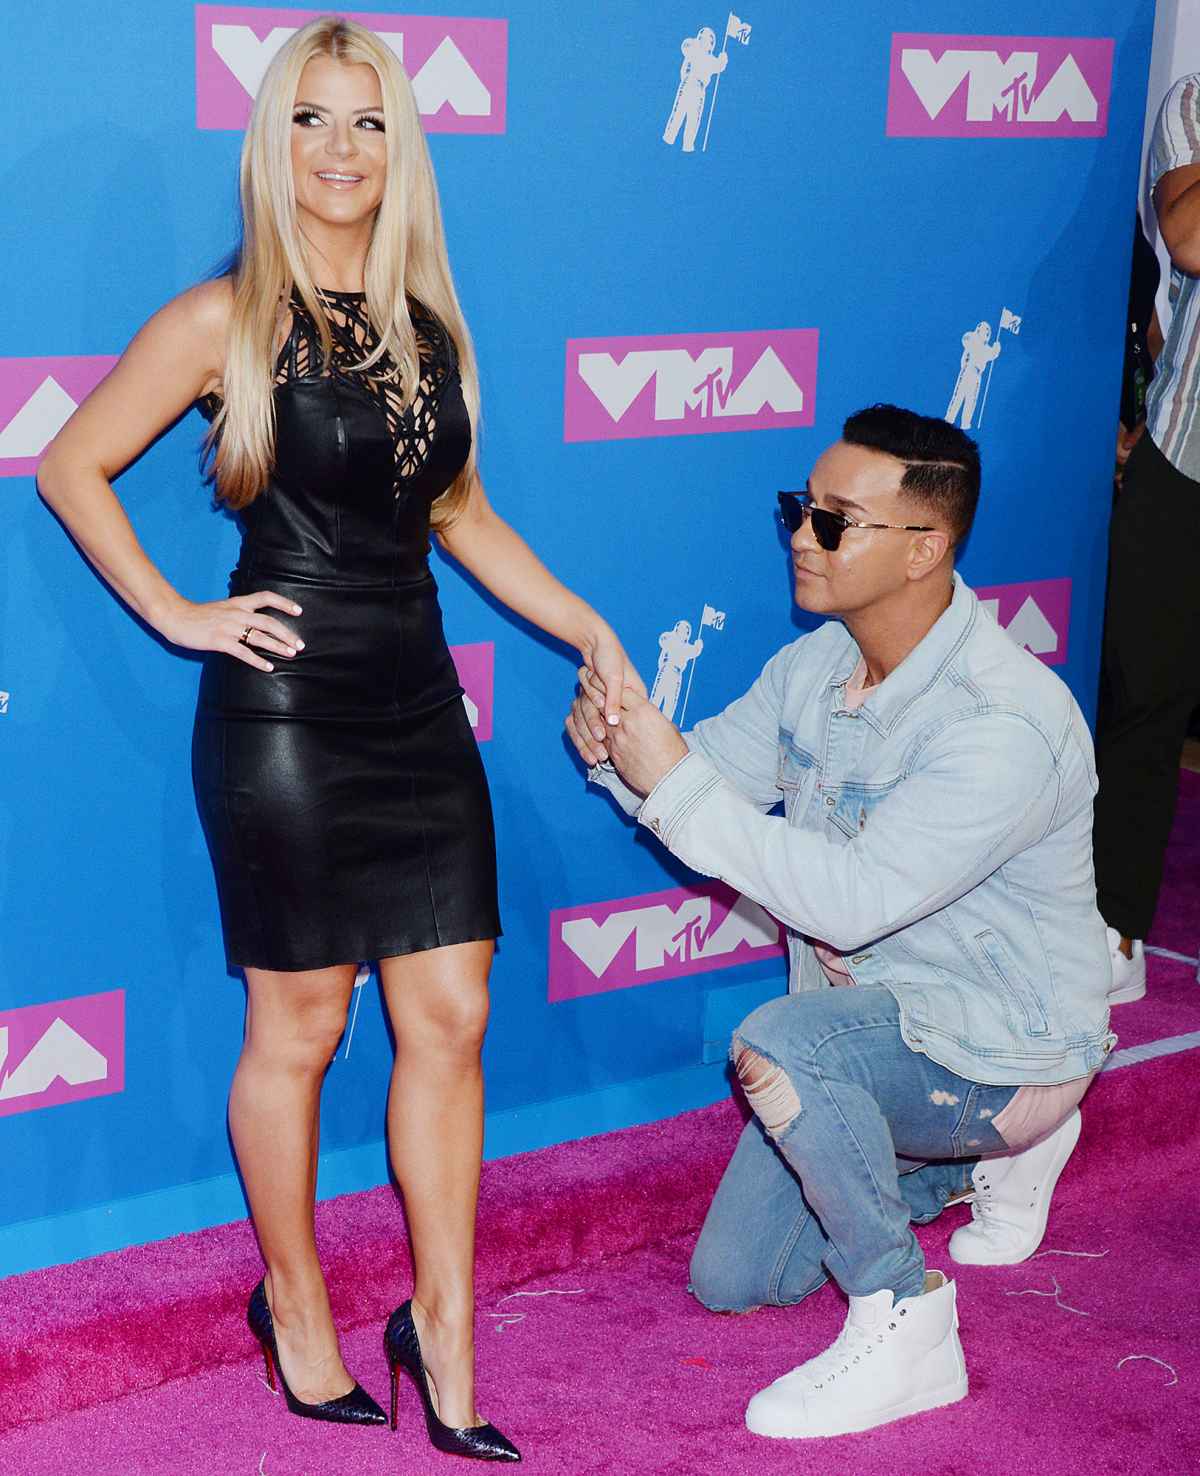 Jersey Shore's Mike Sorrentino and Lauren Pesce's Relationship Timeline